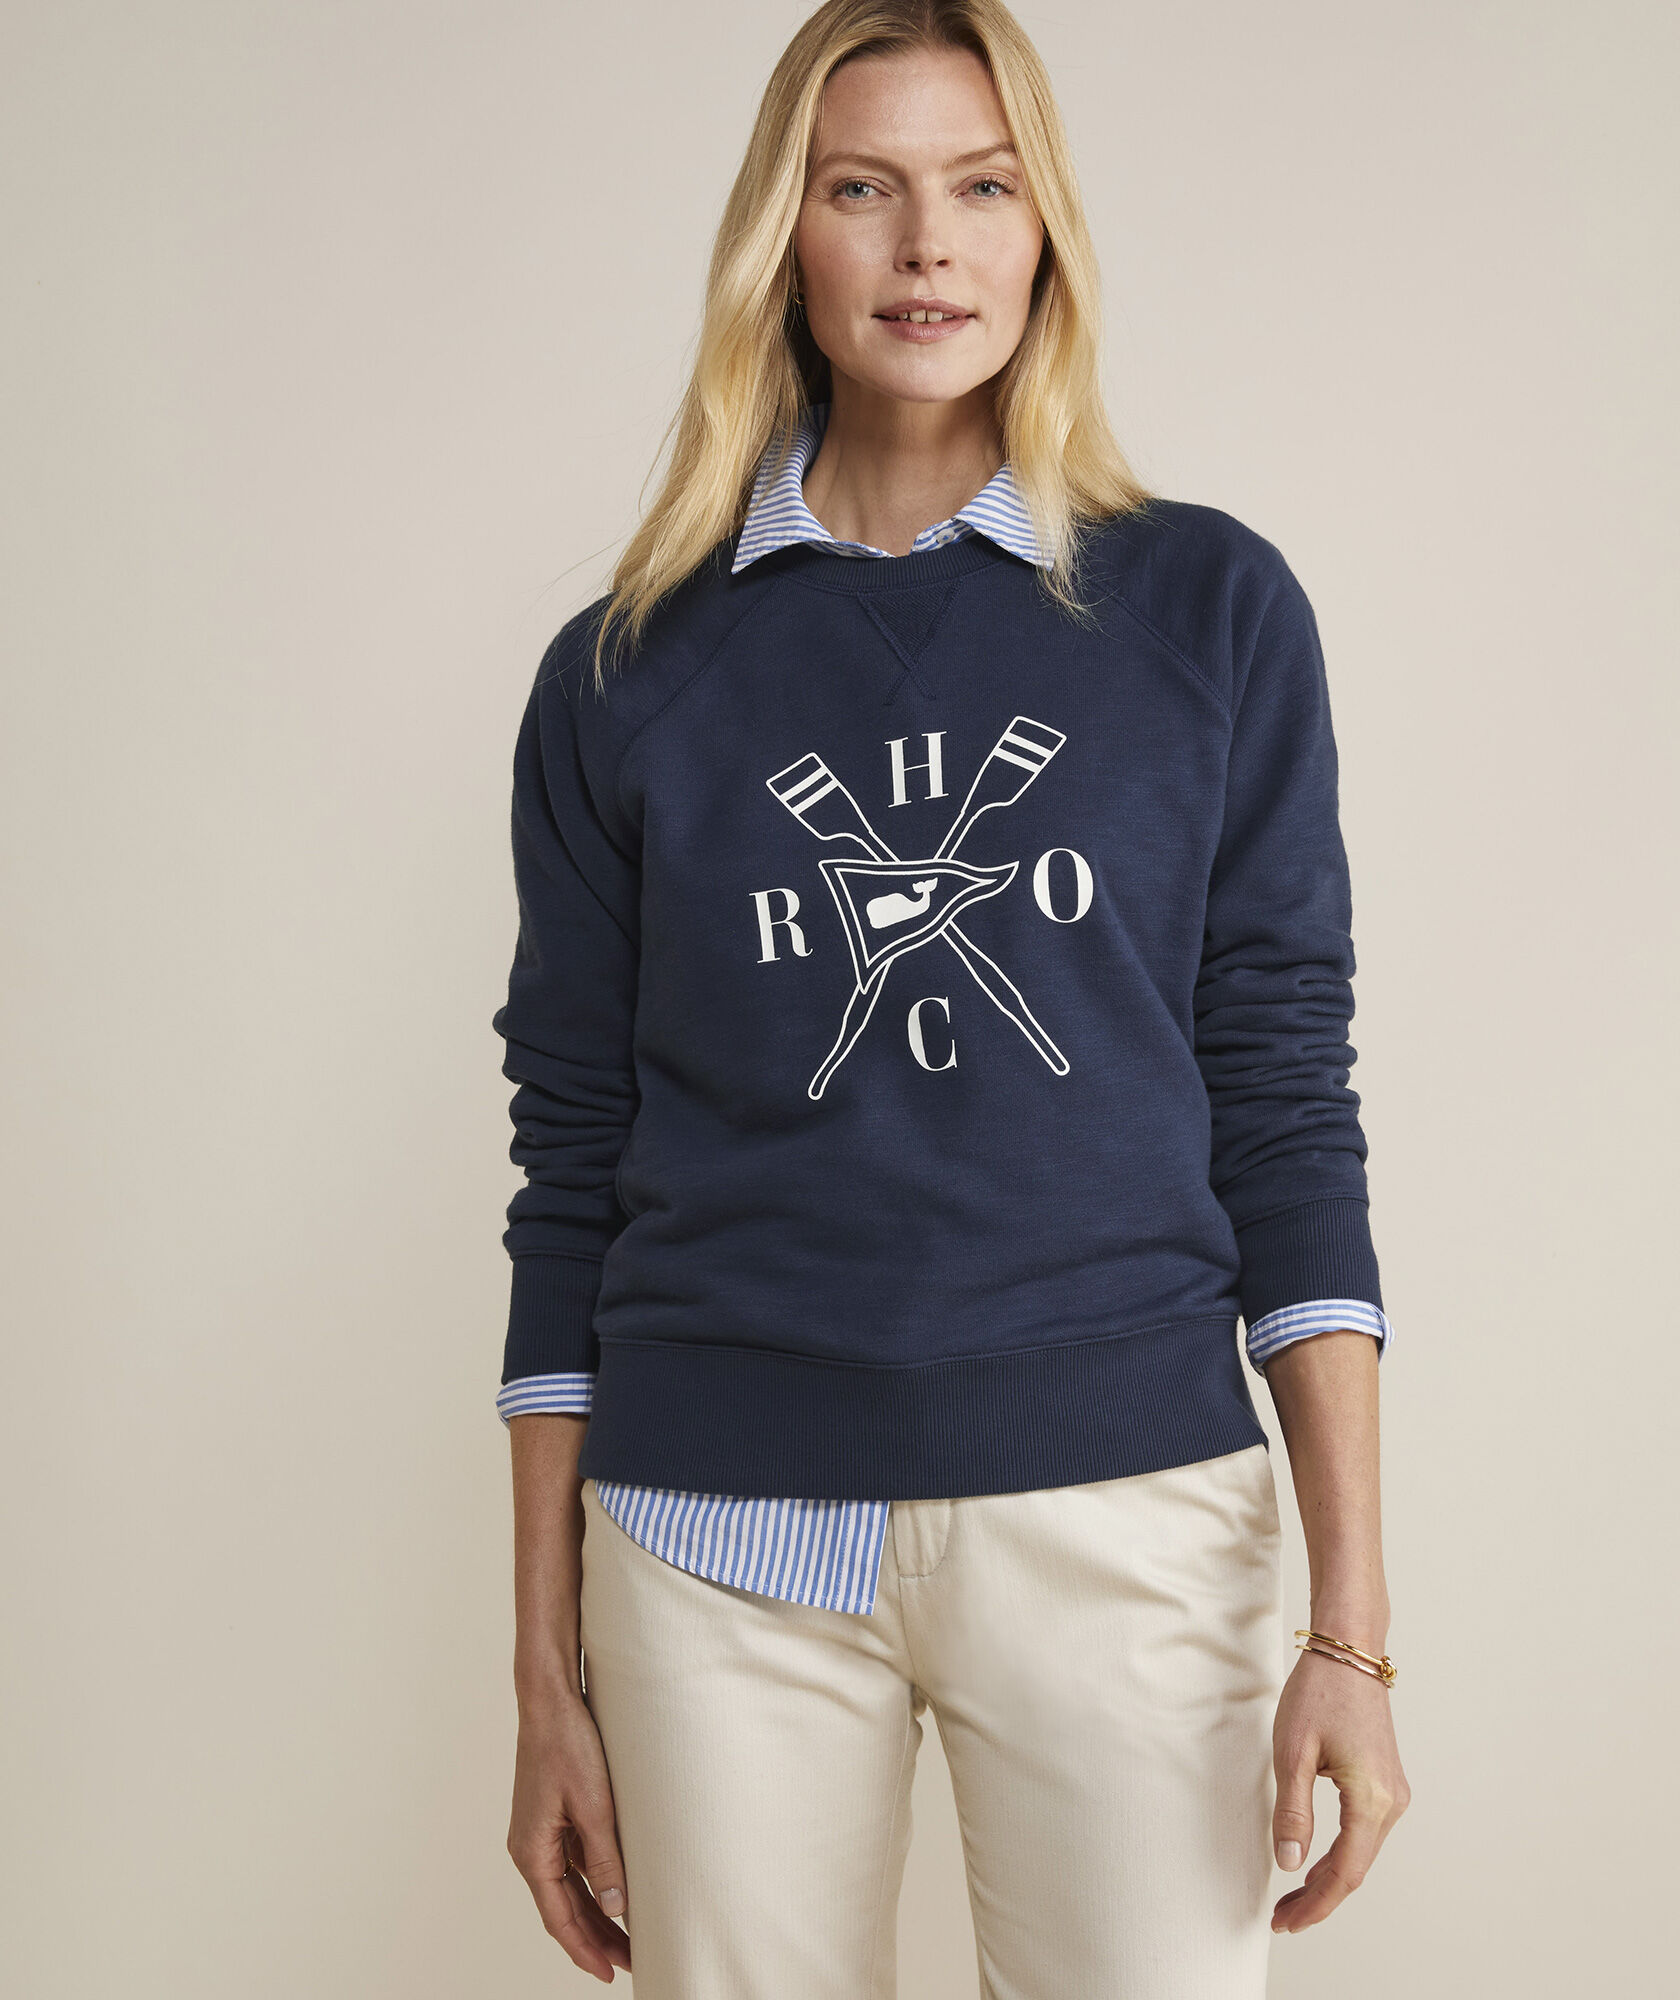 Women's Limited-Edition Head Of The Charles® Sweatshirt